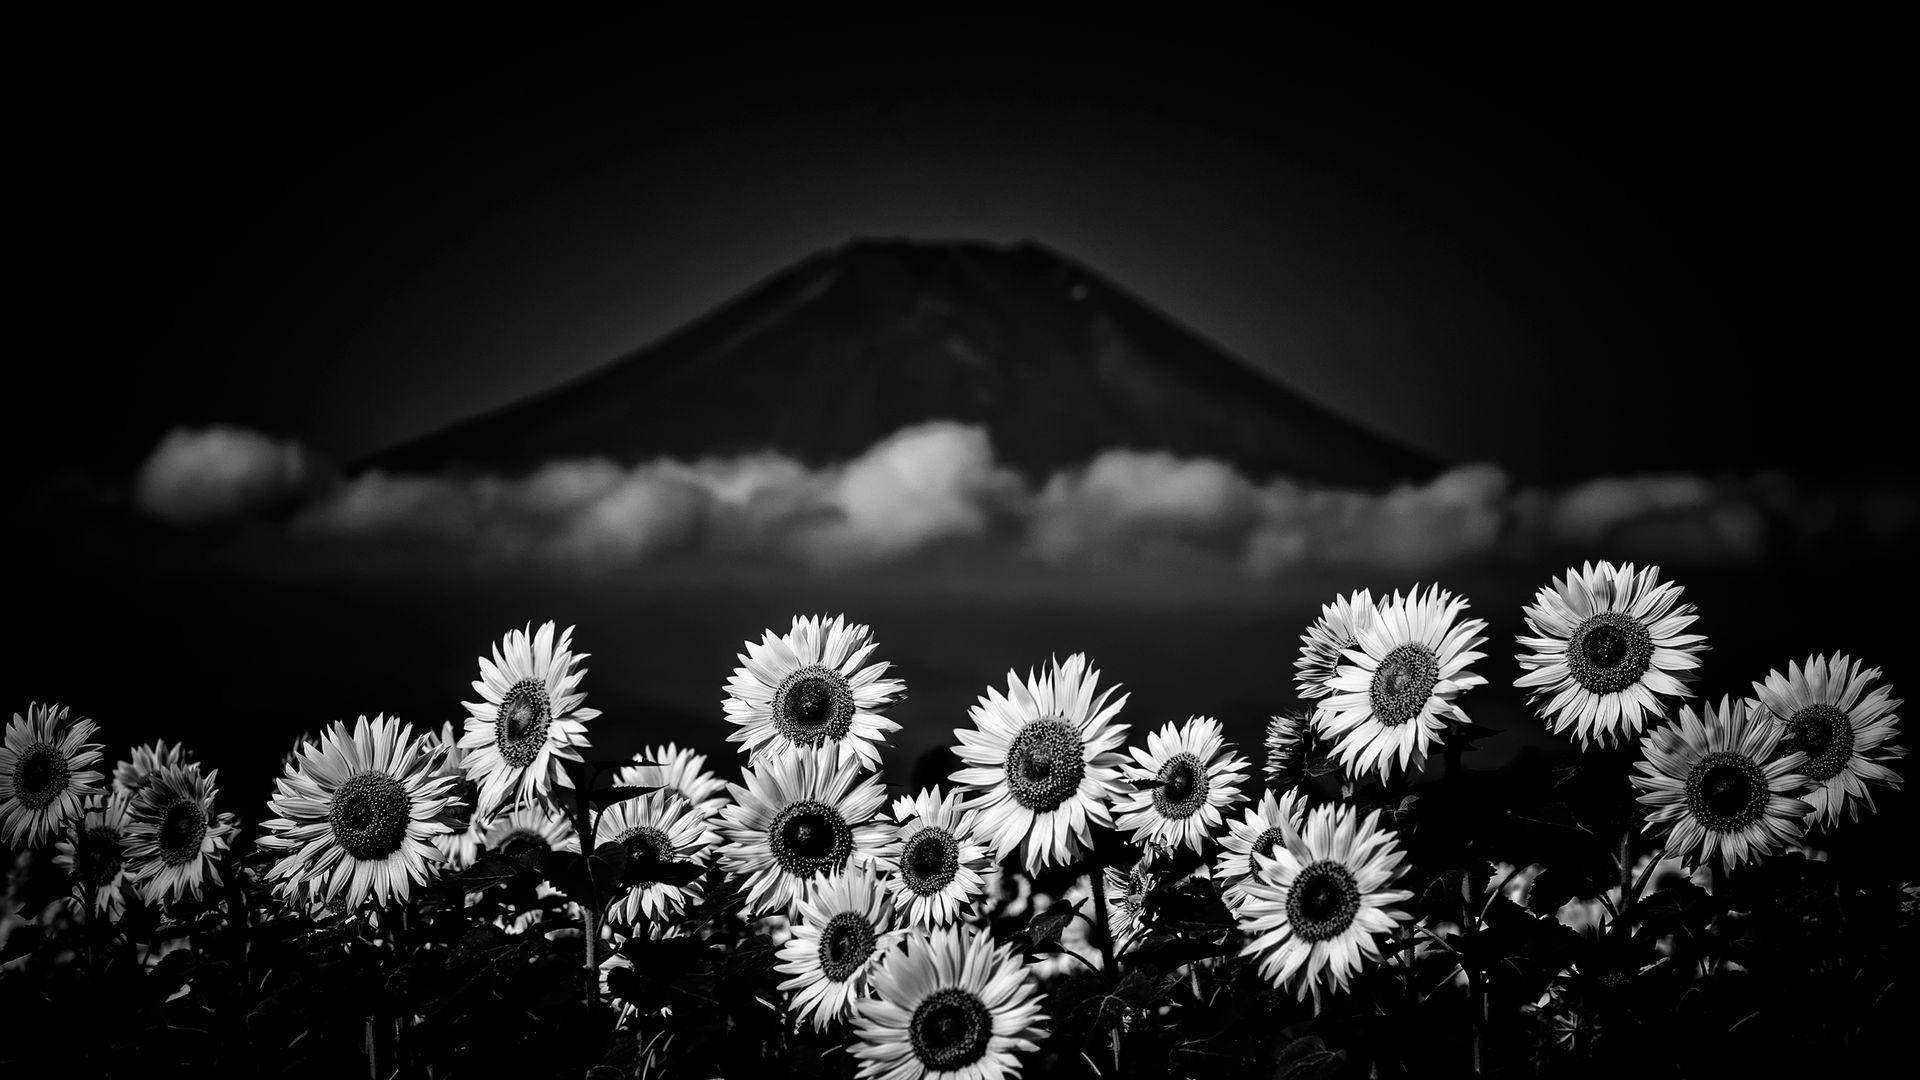 Aesthetic Black And White Sunflower Wallpaper / Home > black and white ...